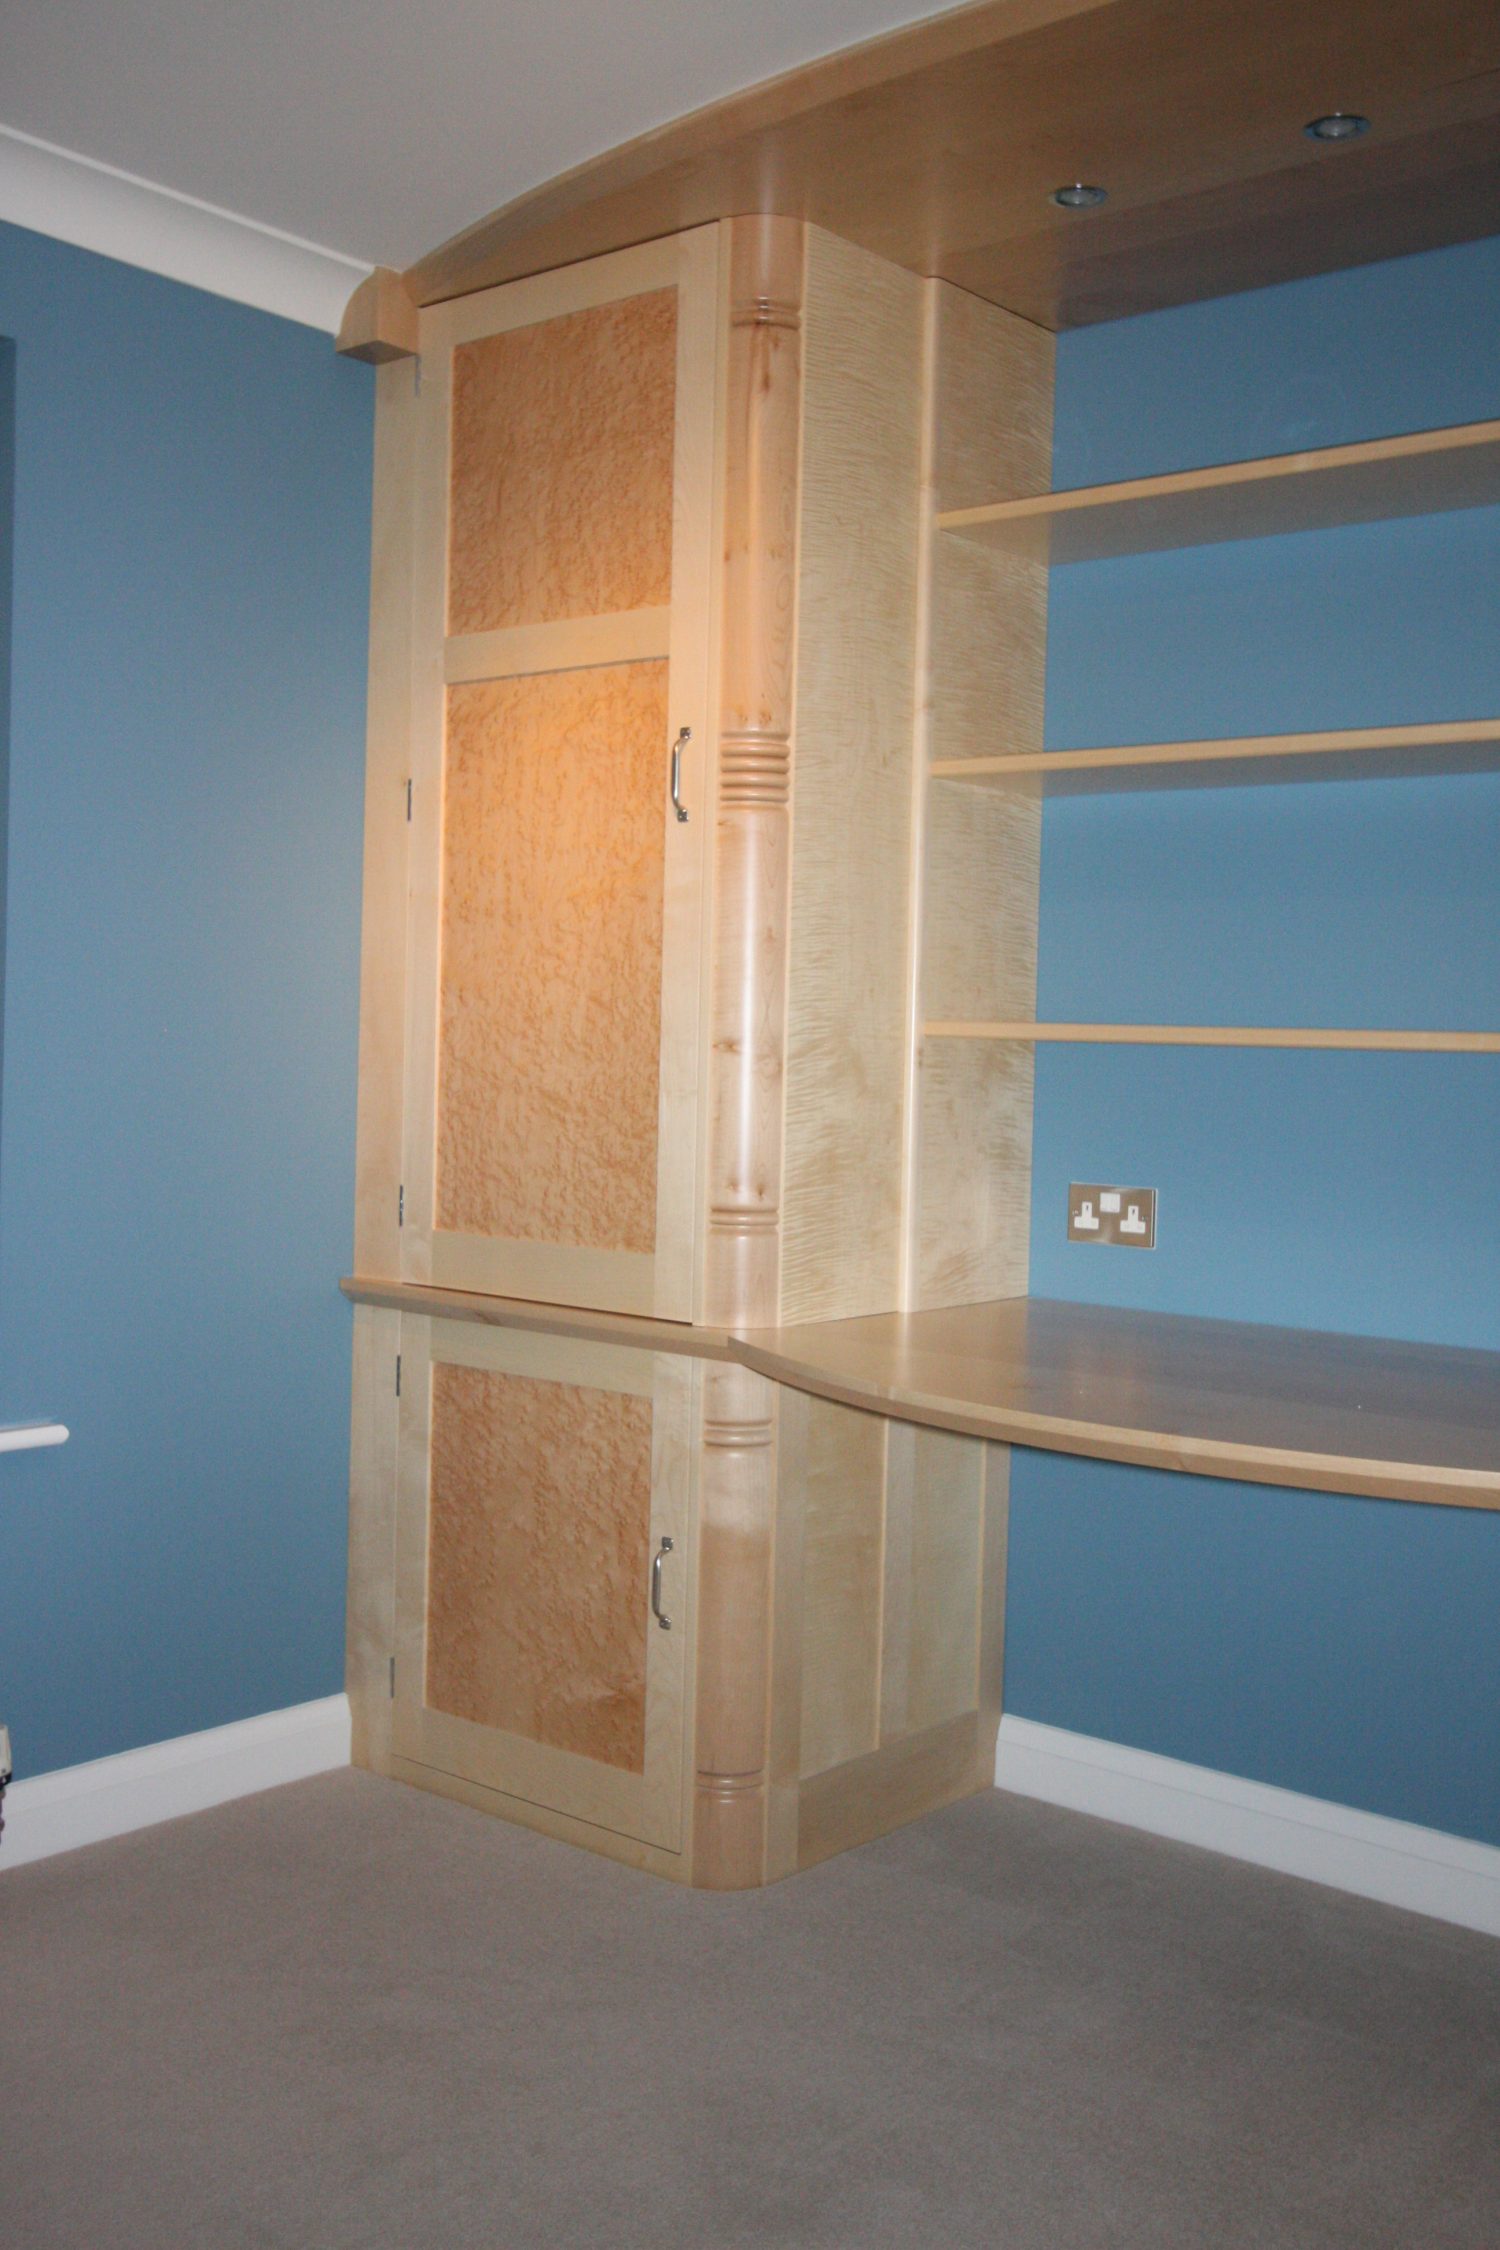 Cupboard Space Each Side, with Shelves, Pull out Trays and Drawers Hidden